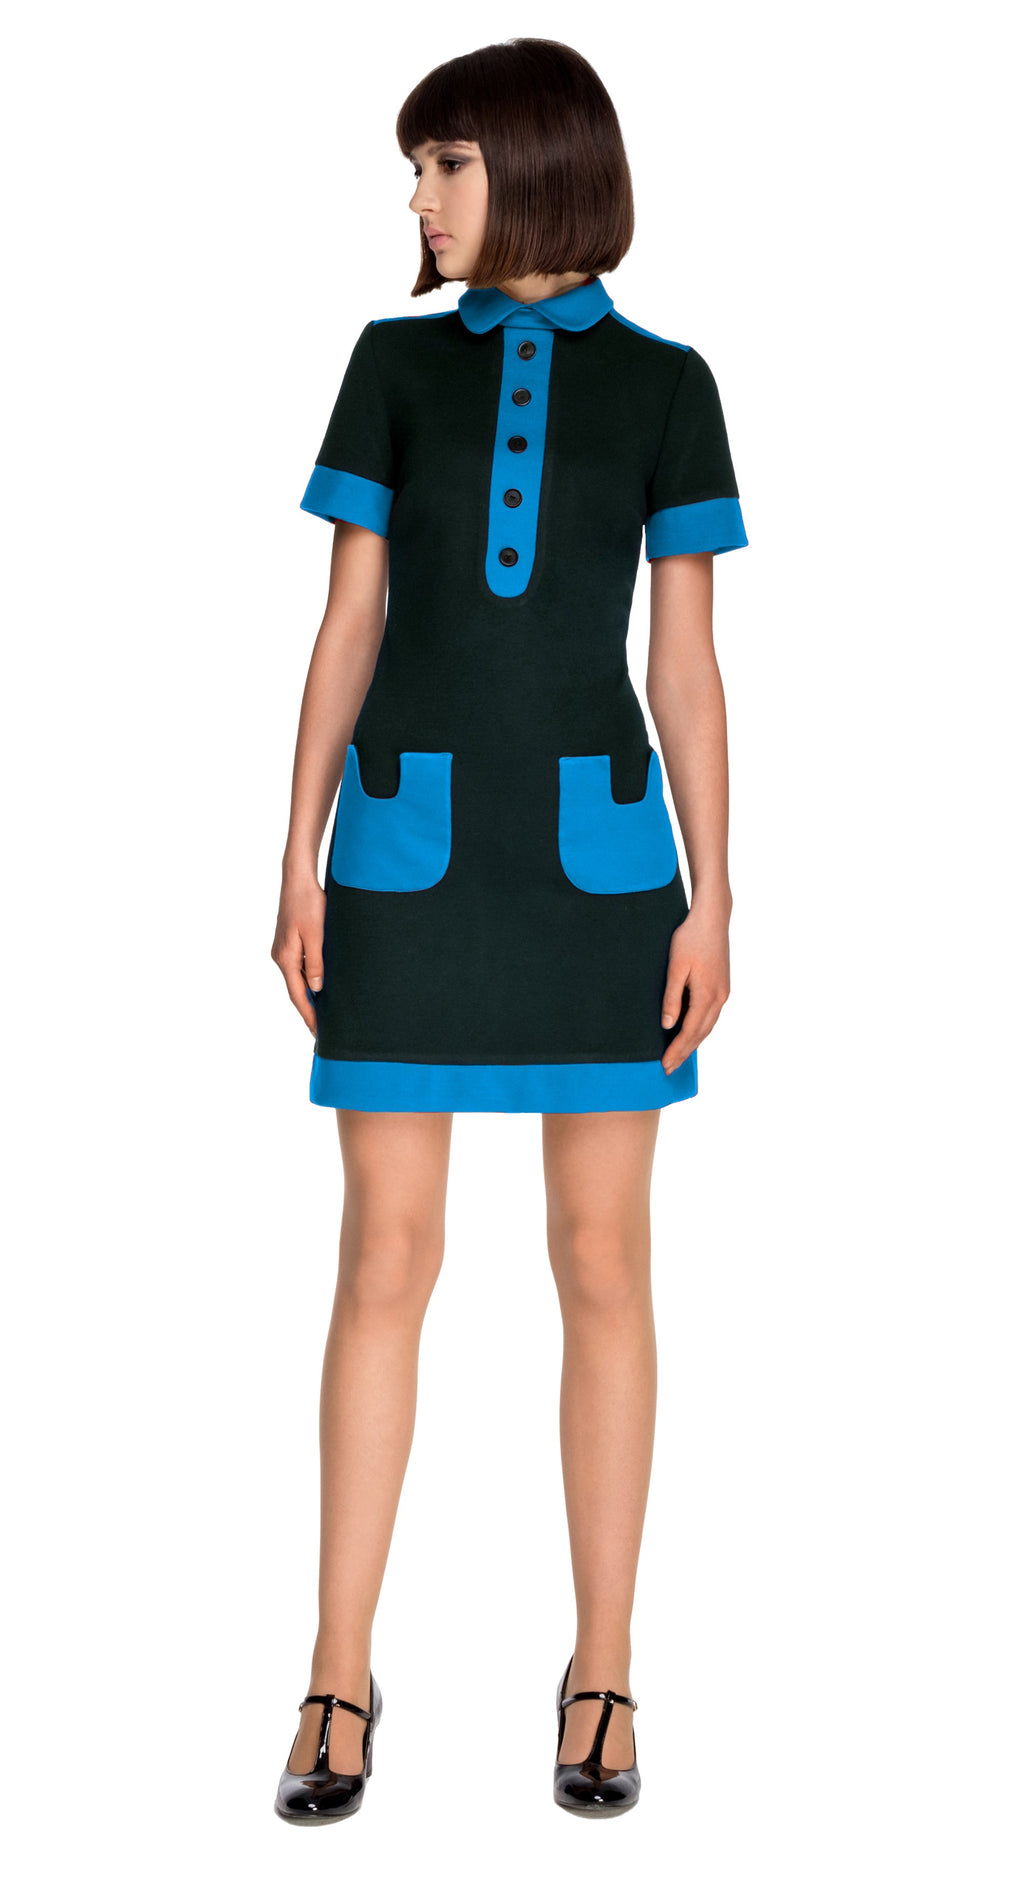 BLACK/TURQUOISE JERSEY DRESS WITH COLLAR